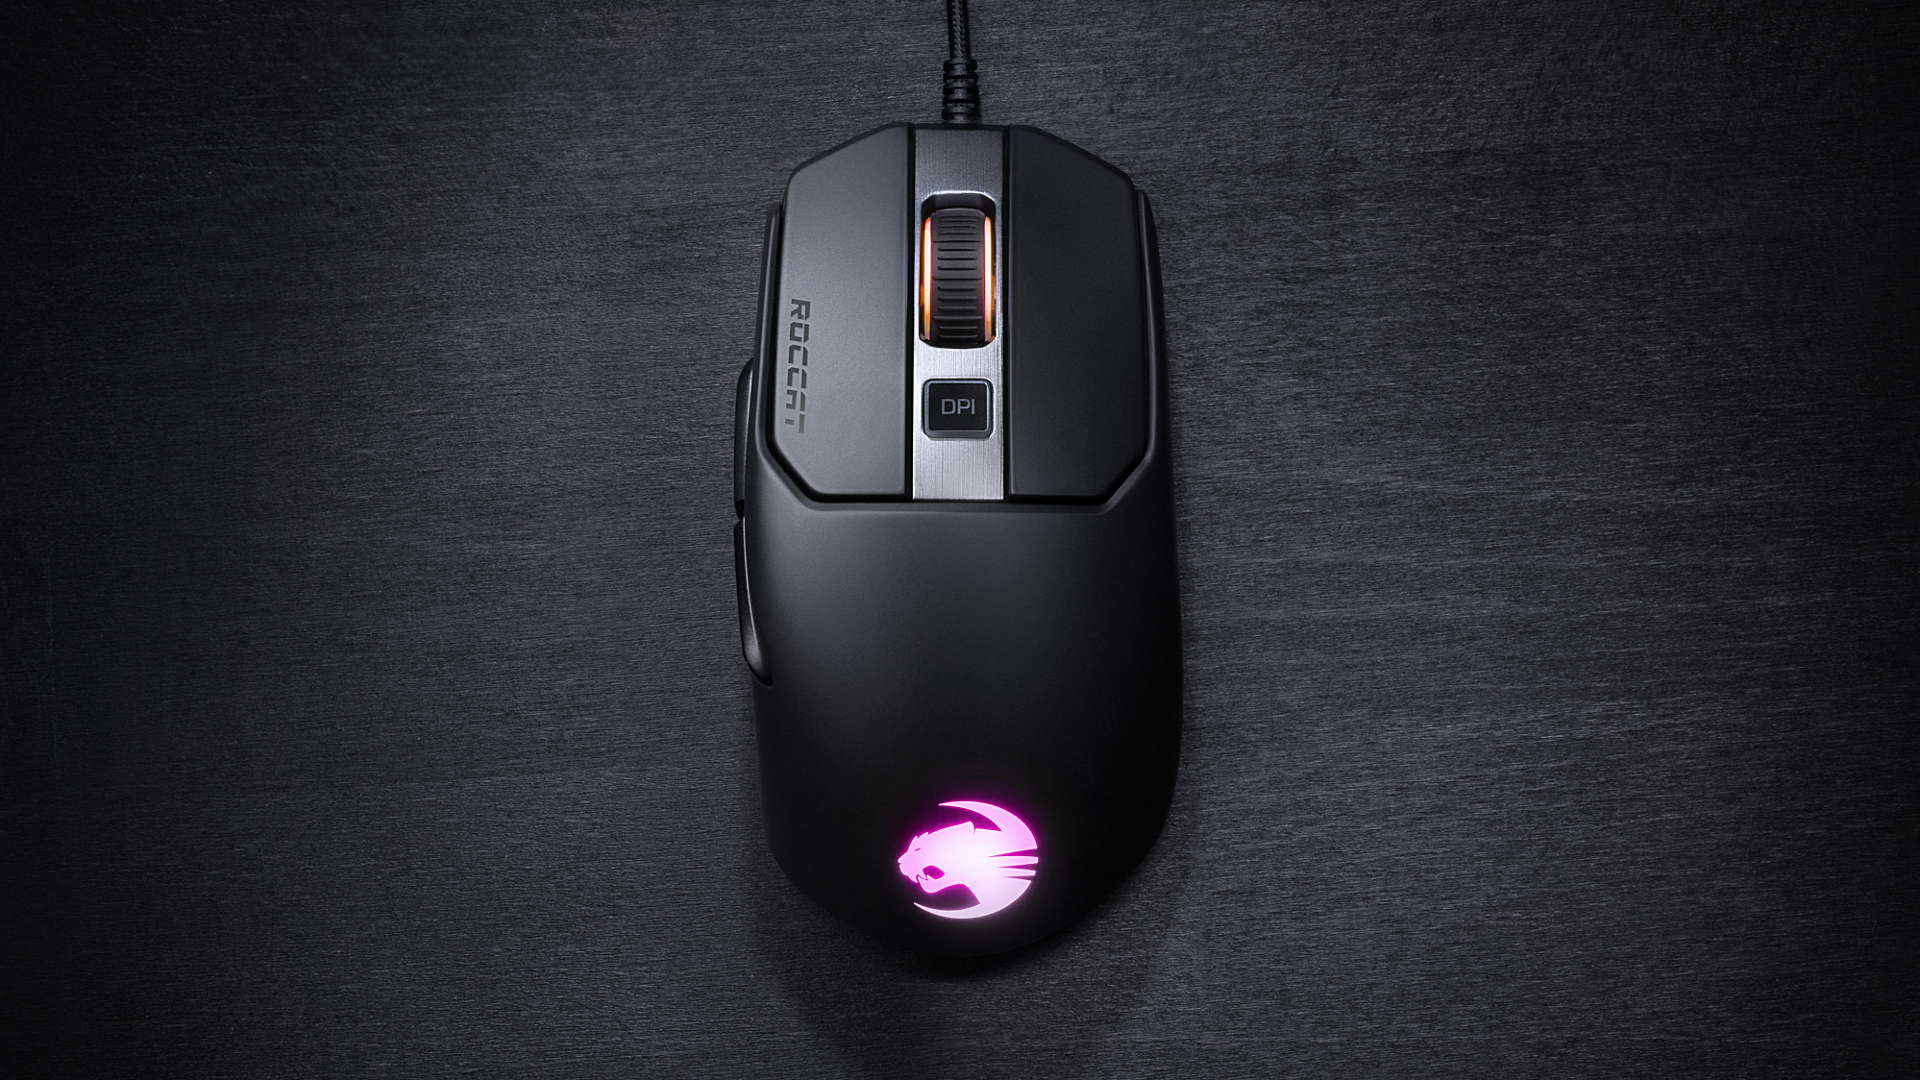 Roccat S New Gaming Mice Use Titan Click To Make You Quicker On The Draw Techradar